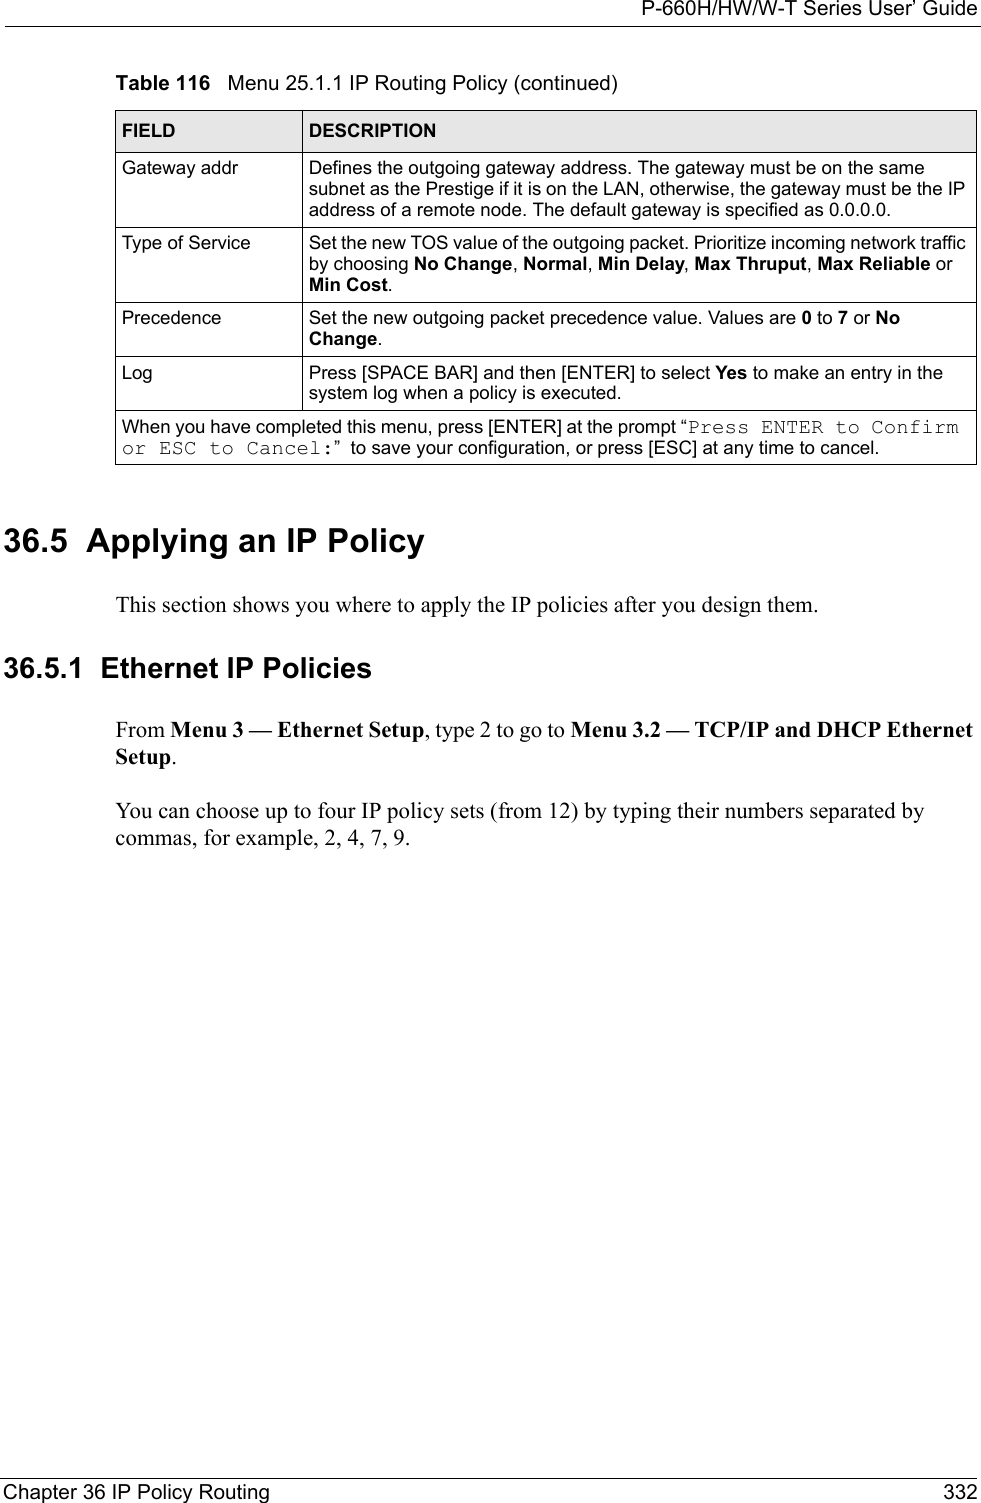 P-660H/HW/W-T Series User’ GuideChapter 36 IP Policy Routing 33236.5  Applying an IP PolicyThis section shows you where to apply the IP policies after you design them.36.5.1  Ethernet IP PoliciesFrom Menu 3 — Ethernet Setup, type 2 to go to Menu 3.2 — TCP/IP and DHCP Ethernet Setup.You can choose up to four IP policy sets (from 12) by typing their numbers separated by commas, for example, 2, 4, 7, 9.Gateway addr Defines the outgoing gateway address. The gateway must be on the same subnet as the Prestige if it is on the LAN, otherwise, the gateway must be the IP address of a remote node. The default gateway is specified as 0.0.0.0.Type of Service Set the new TOS value of the outgoing packet. Prioritize incoming network traffic by choosing No Change, Normal, Min Delay, Max Thruput, Max Reliable or Min Cost.Precedence Set the new outgoing packet precedence value. Values are 0 to 7 or No Change.Log Press [SPACE BAR] and then [ENTER] to select Yes to make an entry in the system log when a policy is executed.When you have completed this menu, press [ENTER] at the prompt “Press ENTER to Confirm or ESC to Cancel:”  to save your configuration, or press [ESC] at any time to cancel.Table 116   Menu 25.1.1 IP Routing Policy (continued)FIELD DESCRIPTION